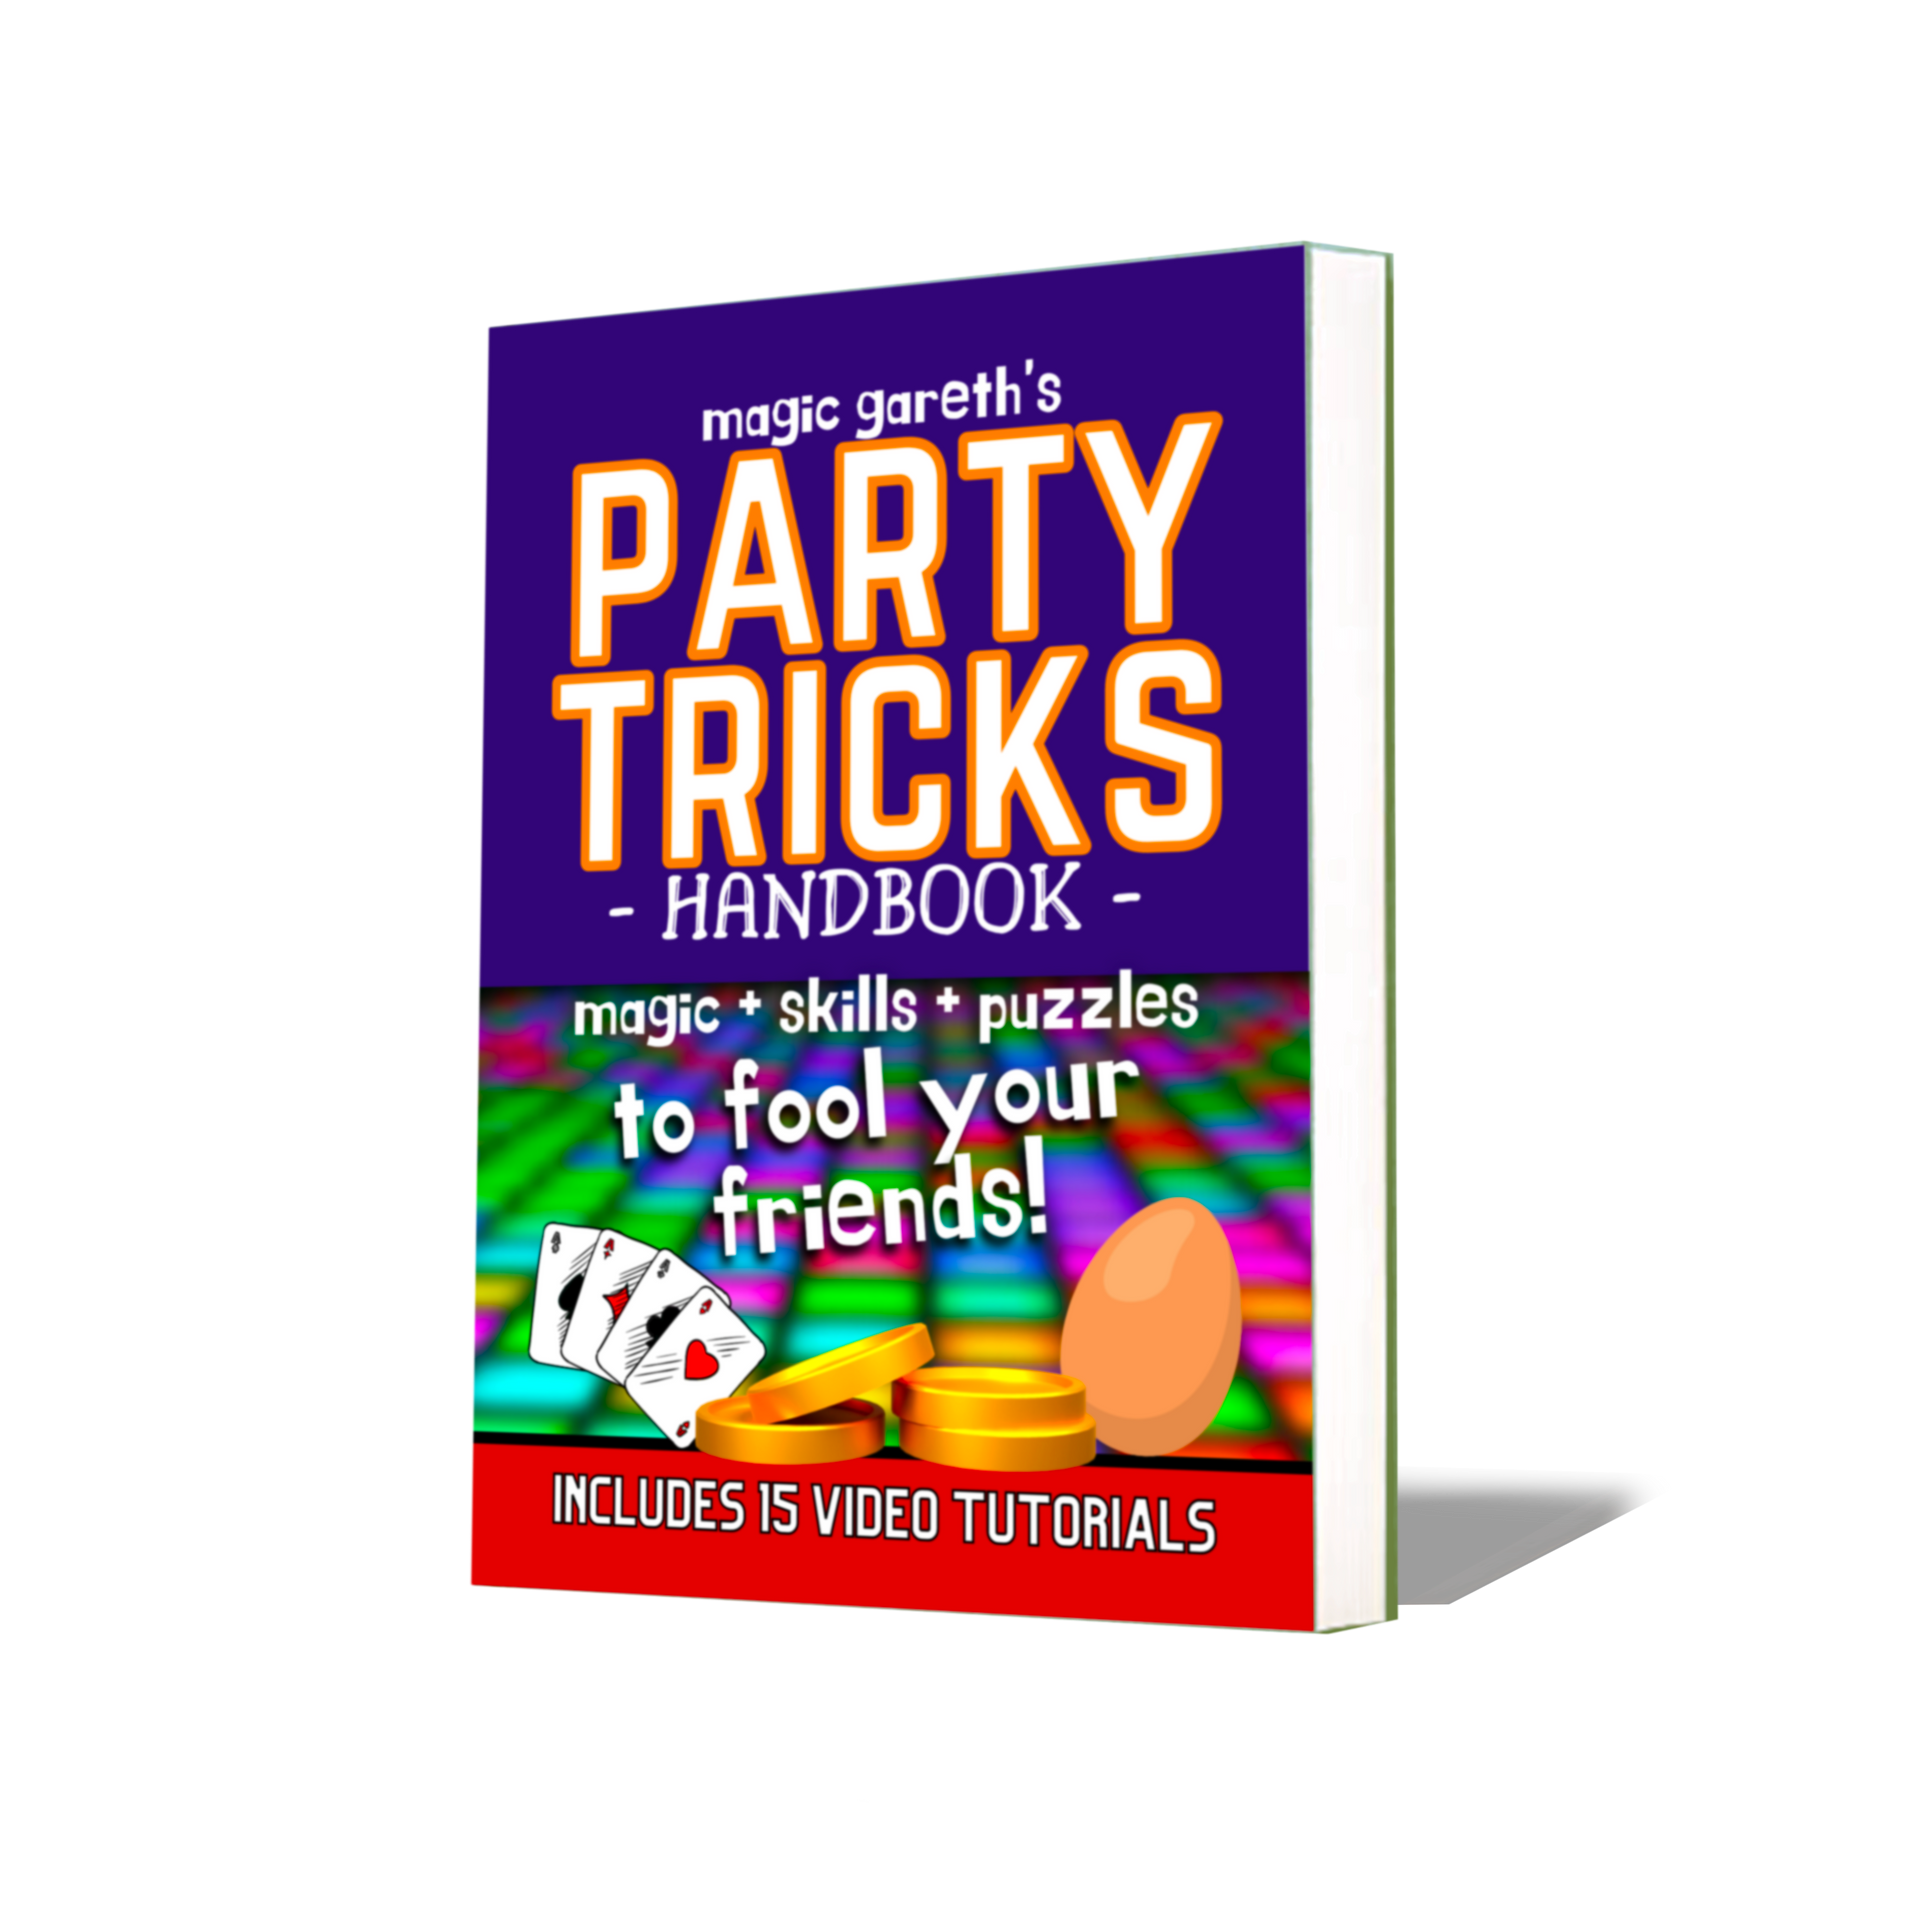 Learn Party Tricks with the Handbook from Magic Gareth